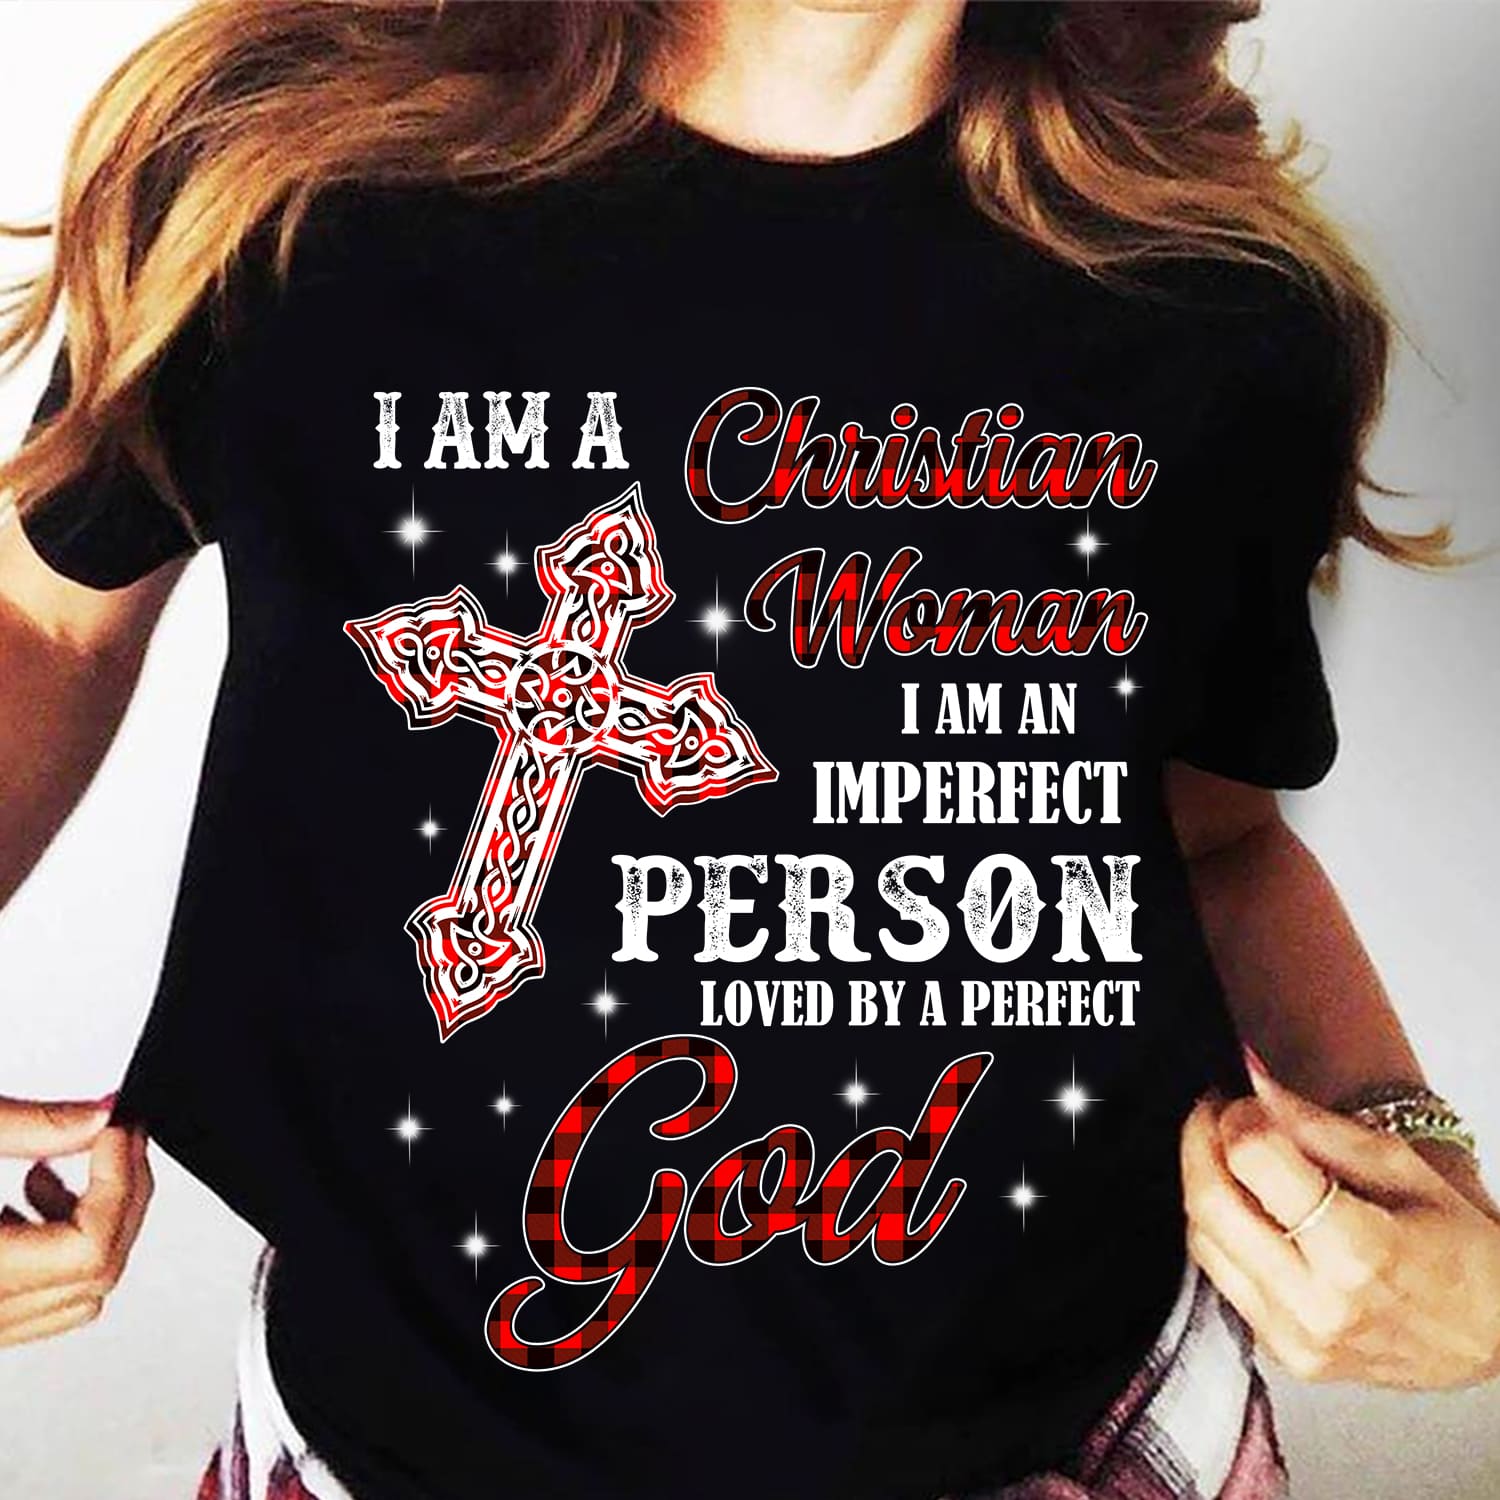 I am a Christian woman I am an imperfect person loved by perfect God - Believe in Jesus